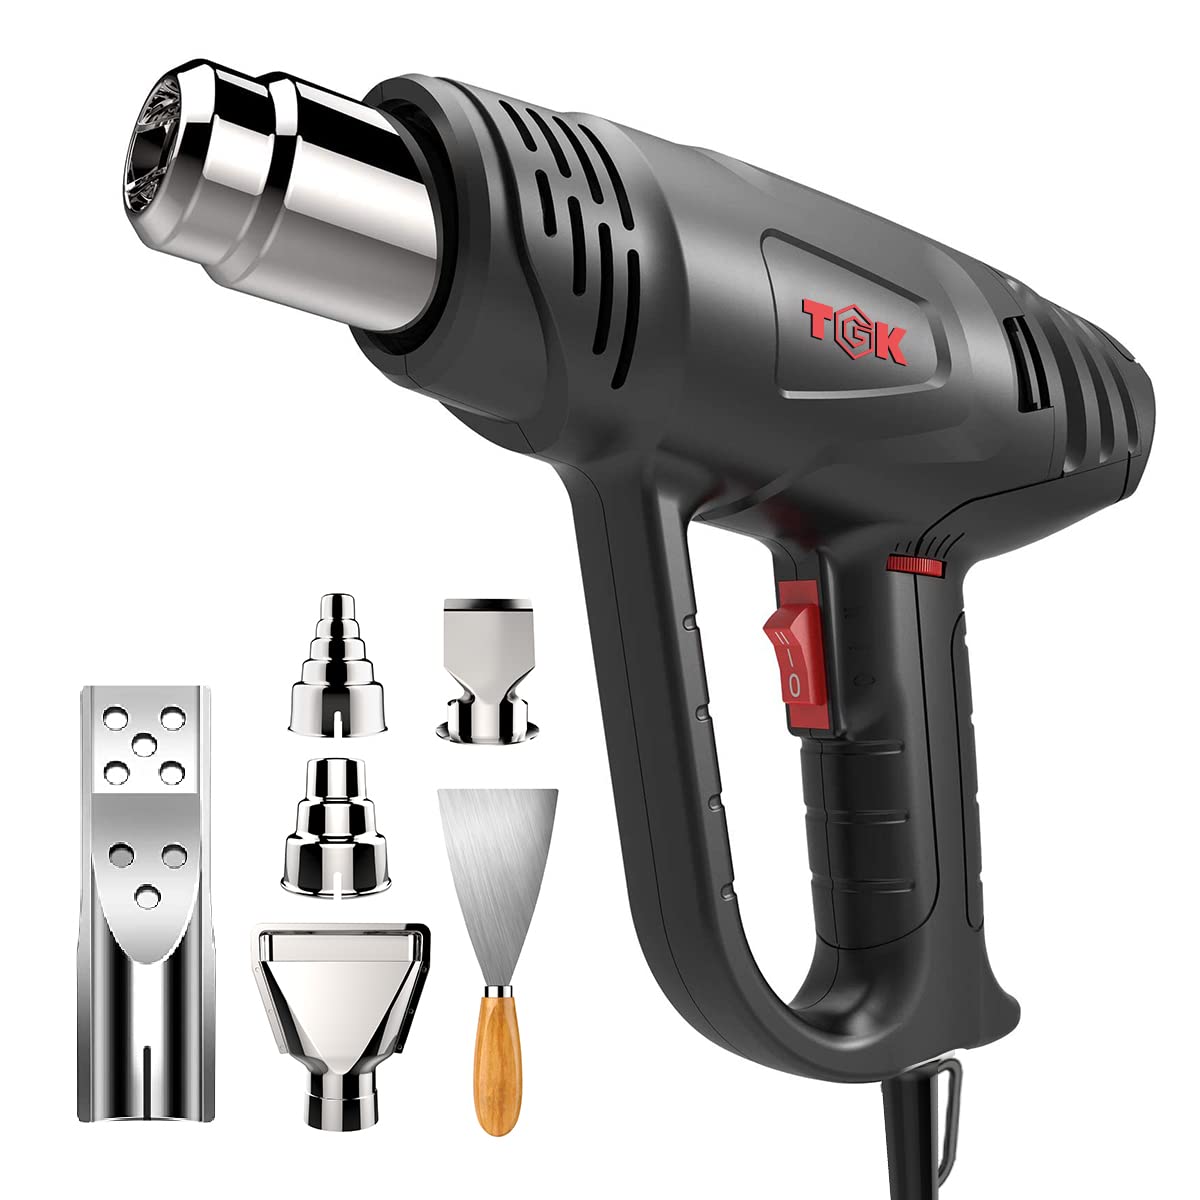 Factory wholesale Heat Gun Tool - Heat Gun, TGK 1800W Heavy Duty Hot Air Gun Kit 122℉~1202℉ Dual Temperature Settings with 6 Nozzle Attachments Overload Protection for Crafts, Shrink Wrapping/Tubi...